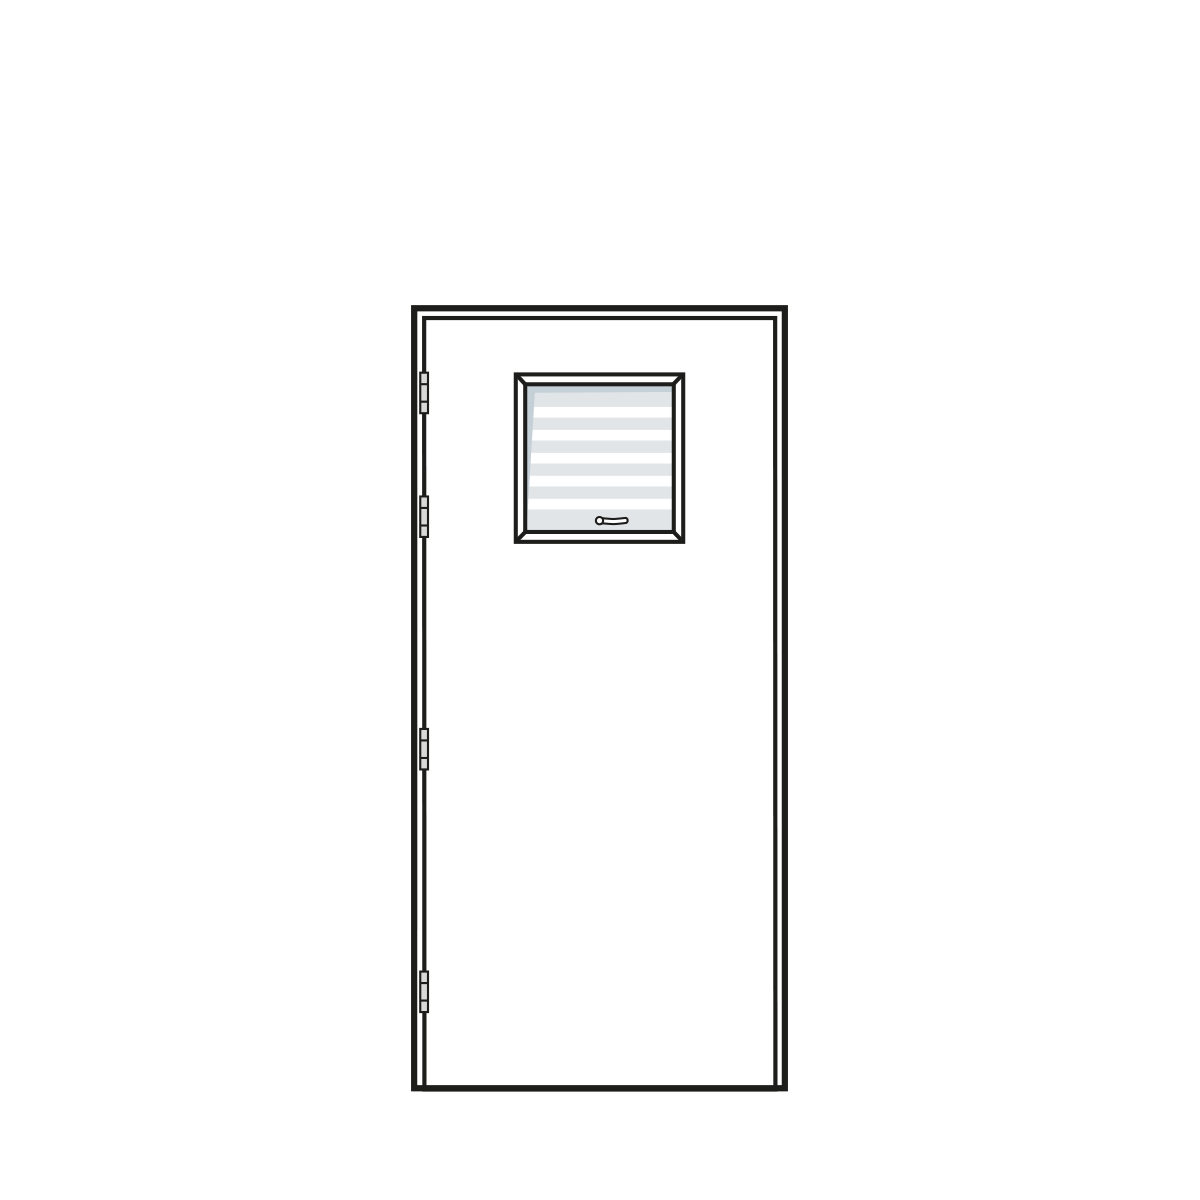 Door Configuration - Single Doorset with Privacy Vision Panel - Code S-PV